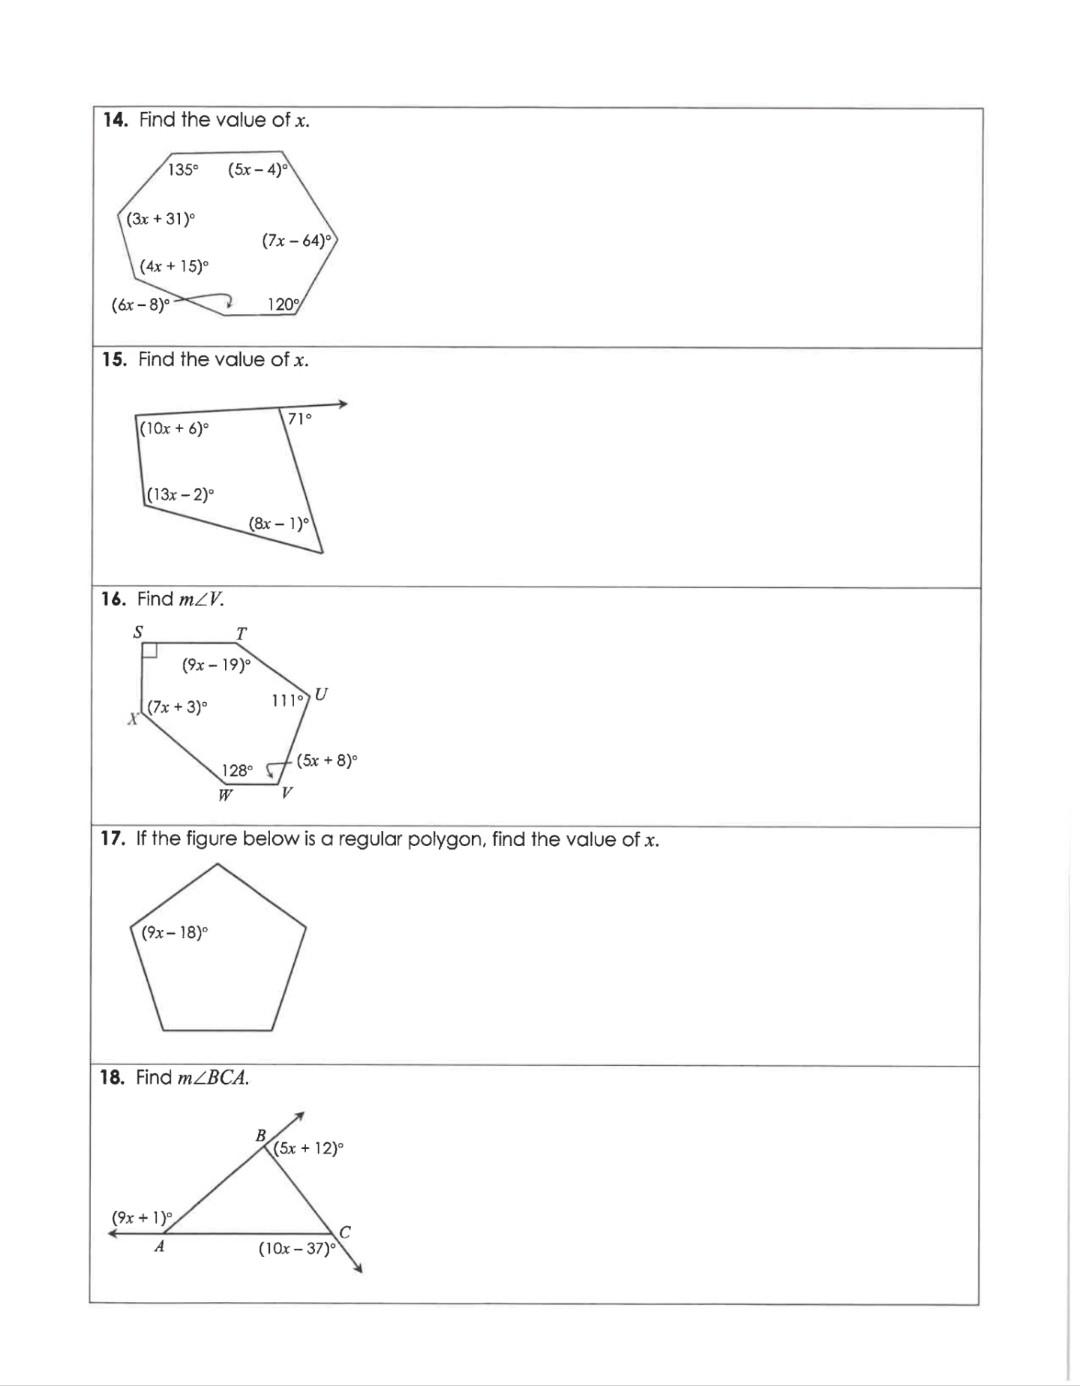 unit 7 homework 1 angles of polygons answers